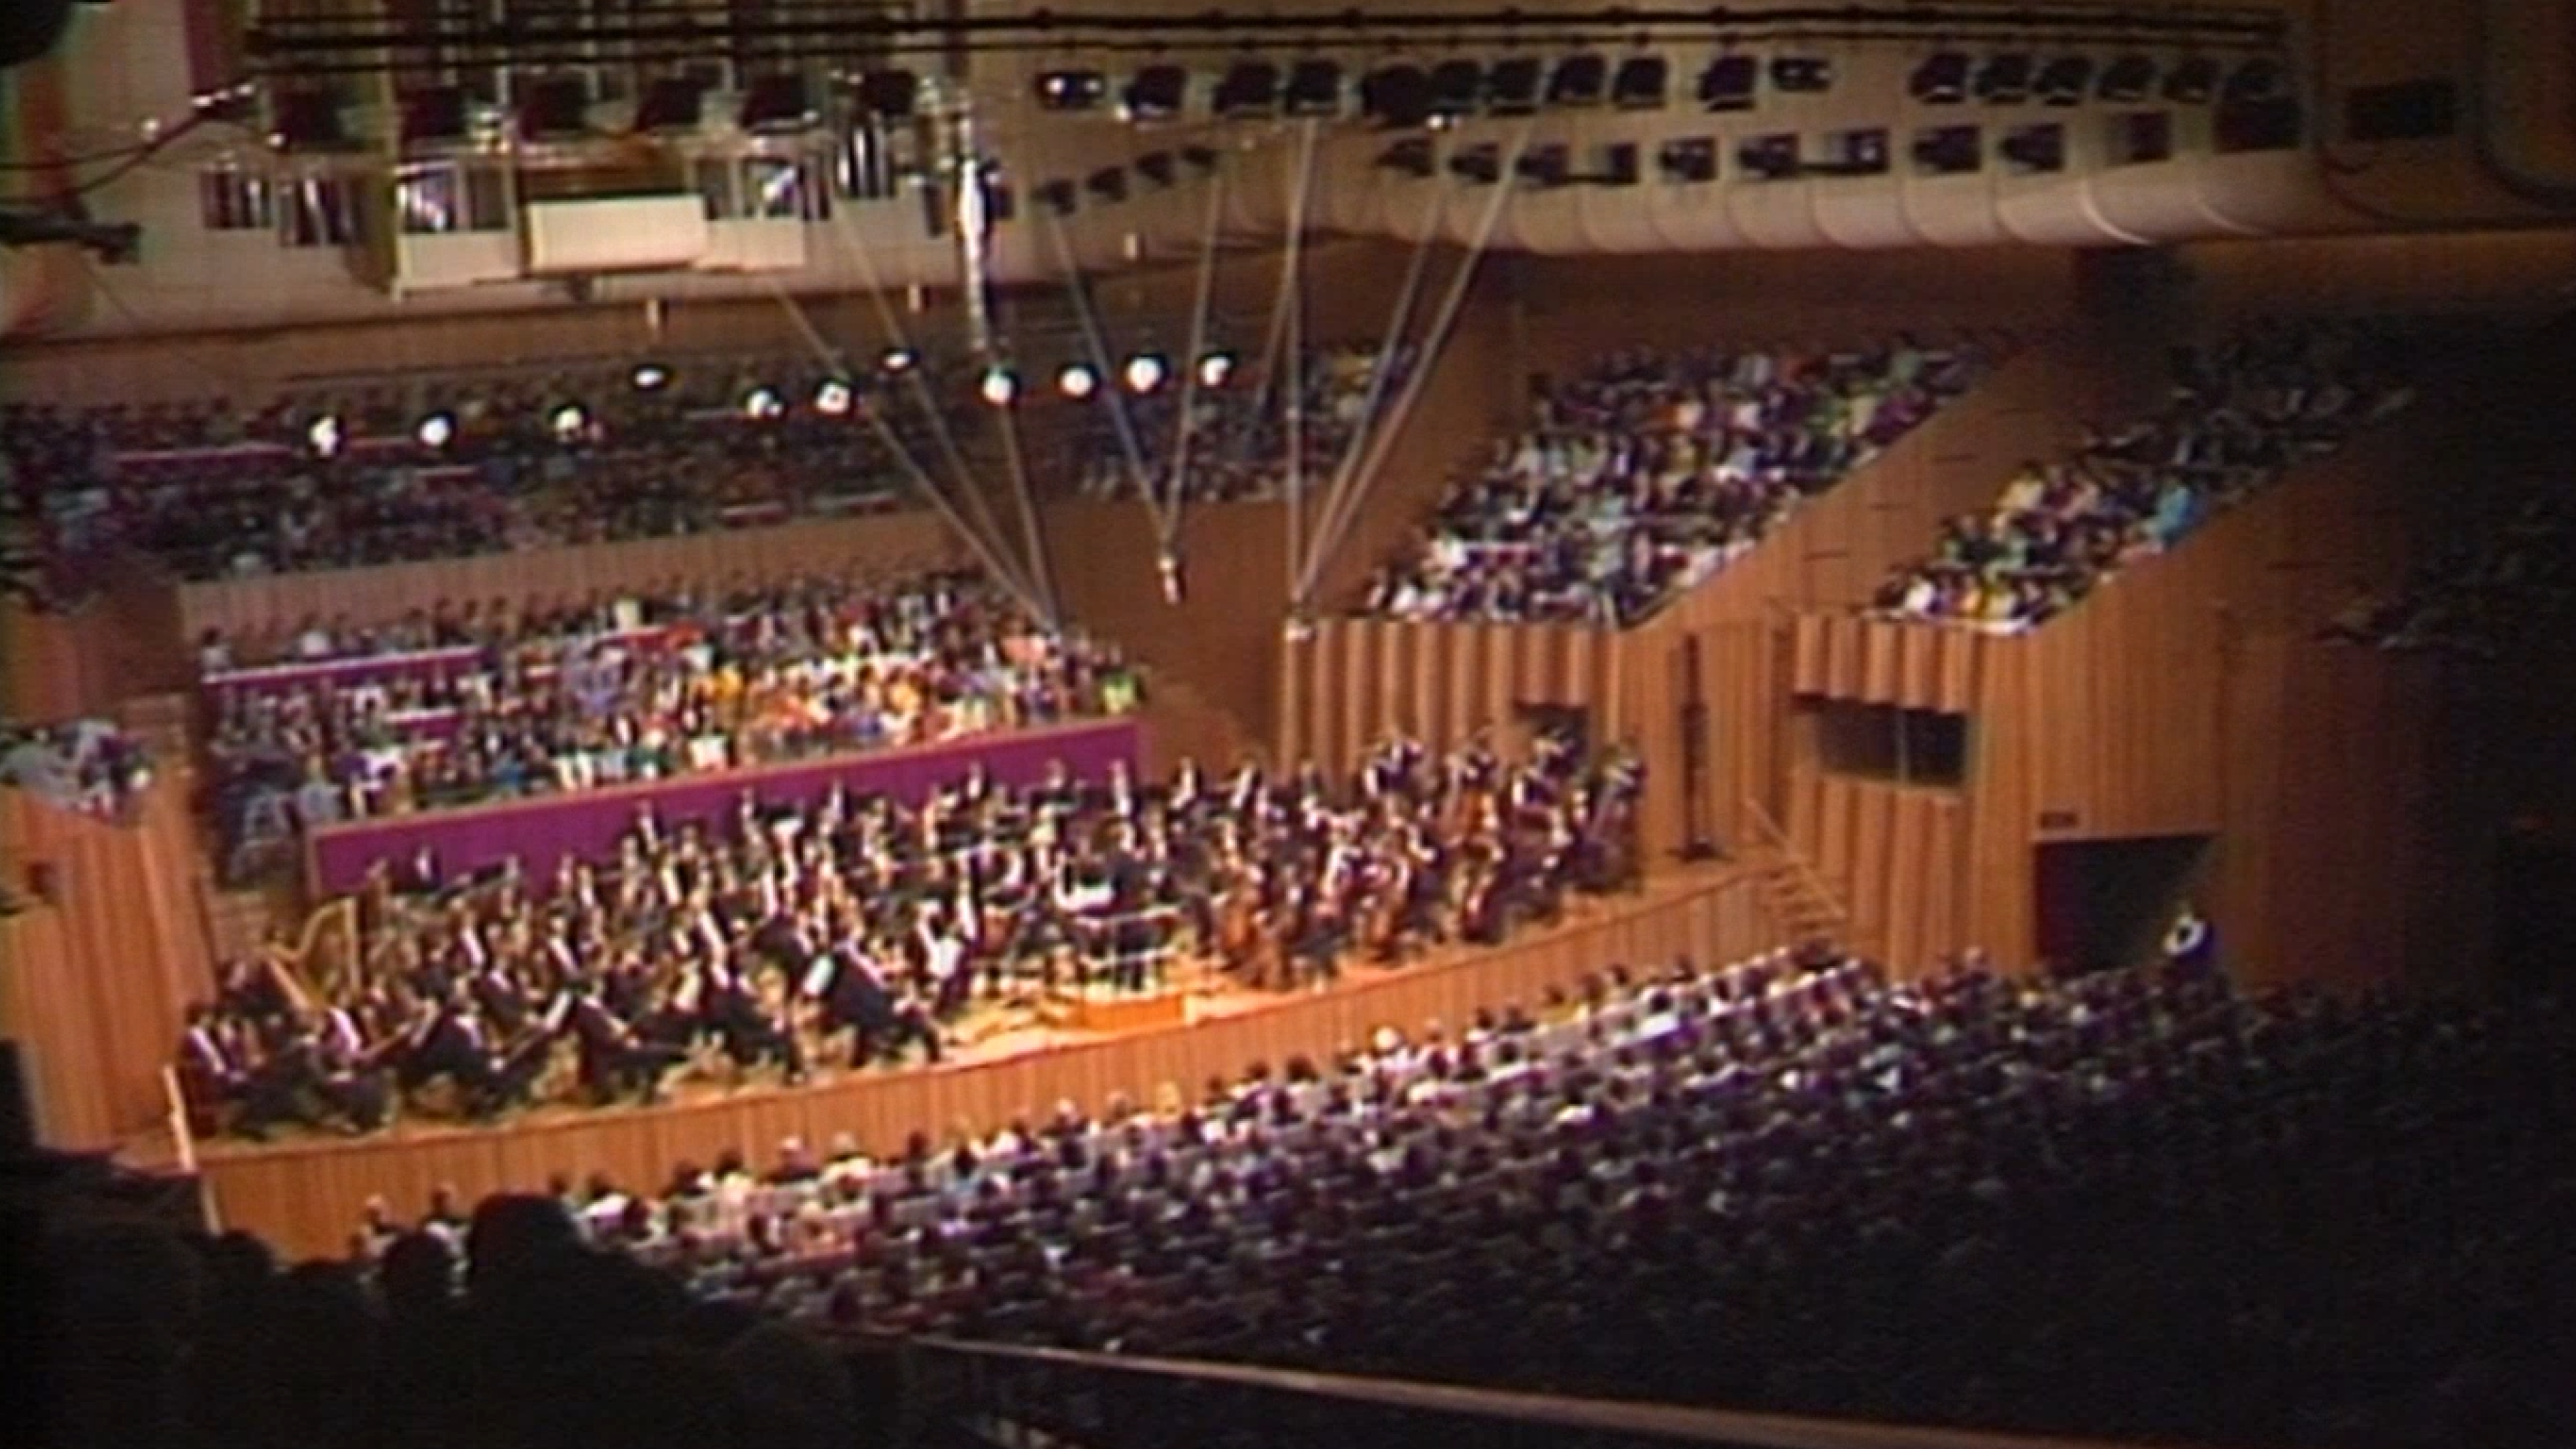 An orchestra playing on stage in the Concert Hall, as viewed from the back of the hall.